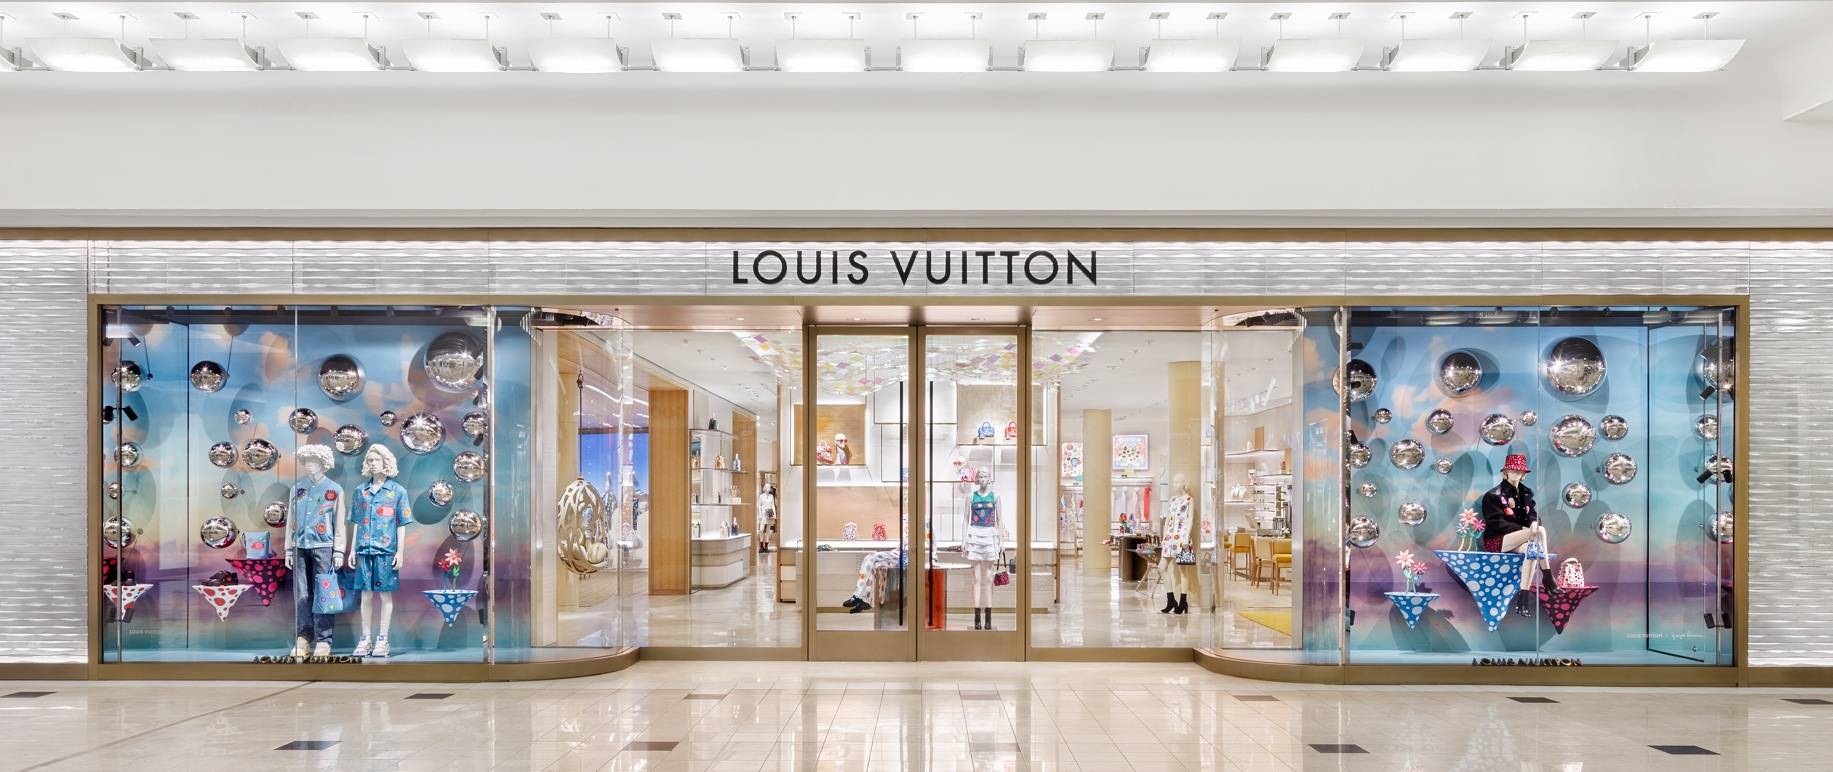 Louis Vuitton Perpetuates Primary Color Trend To New Atlanta Location Store